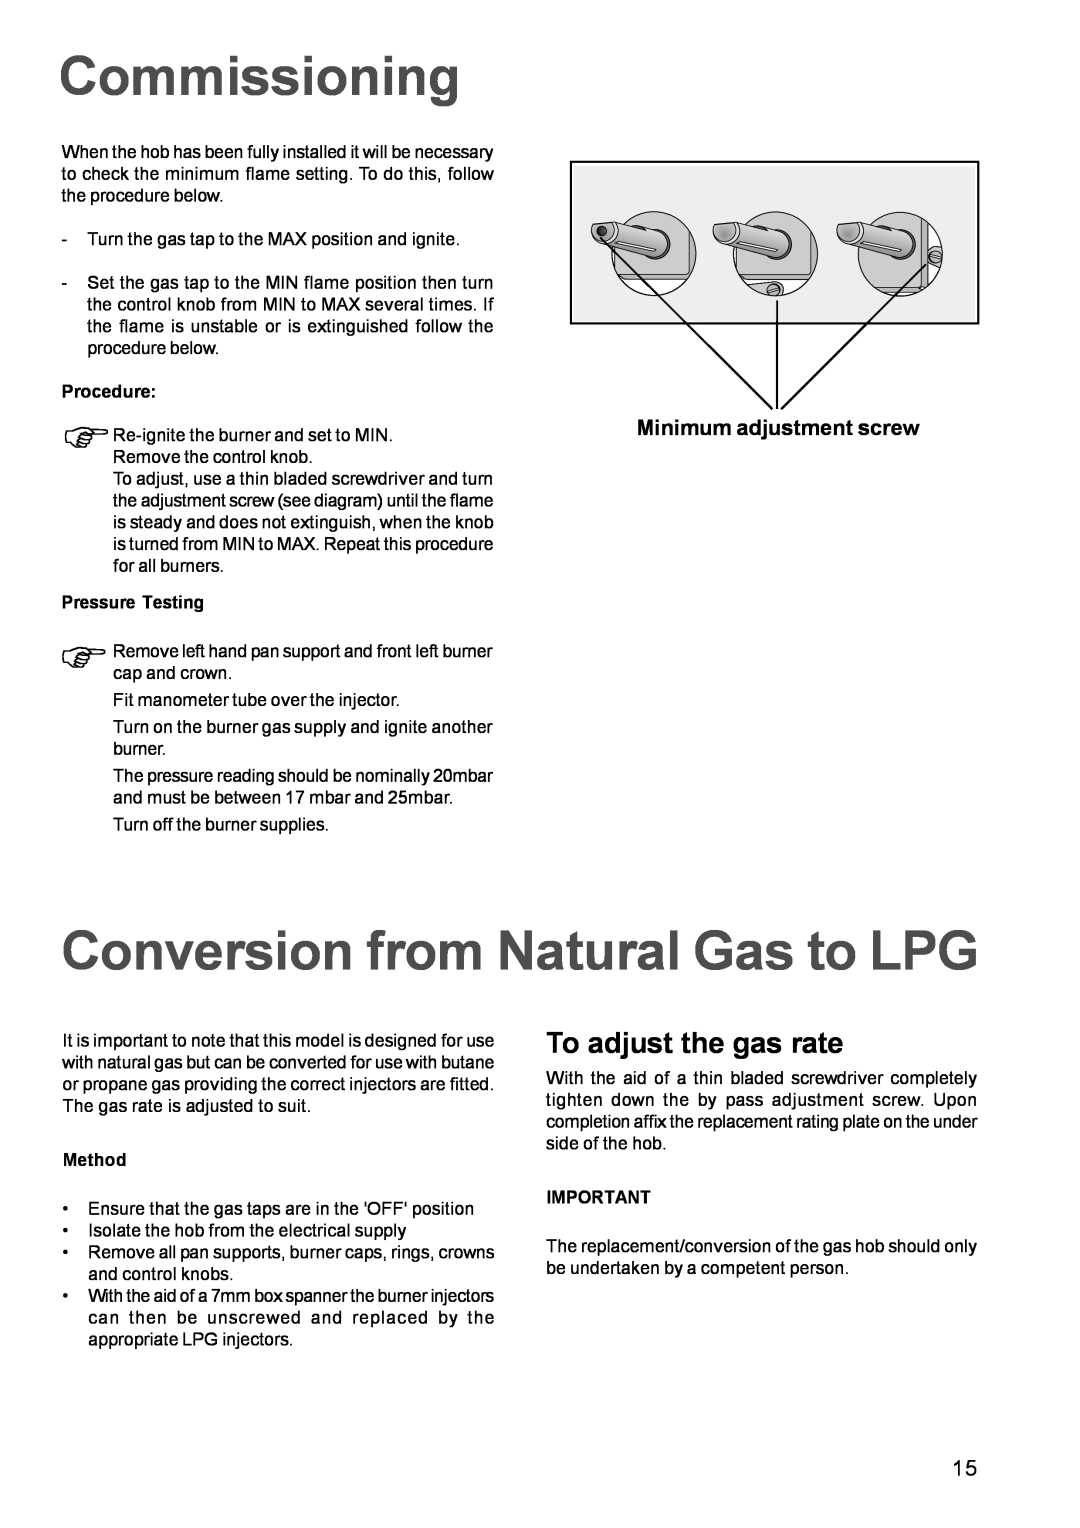 Electrolux EHG 680 Commissioning, Conversion from Natural Gas to LPG, To adjust the gas rate, Minimum adjustment screw 